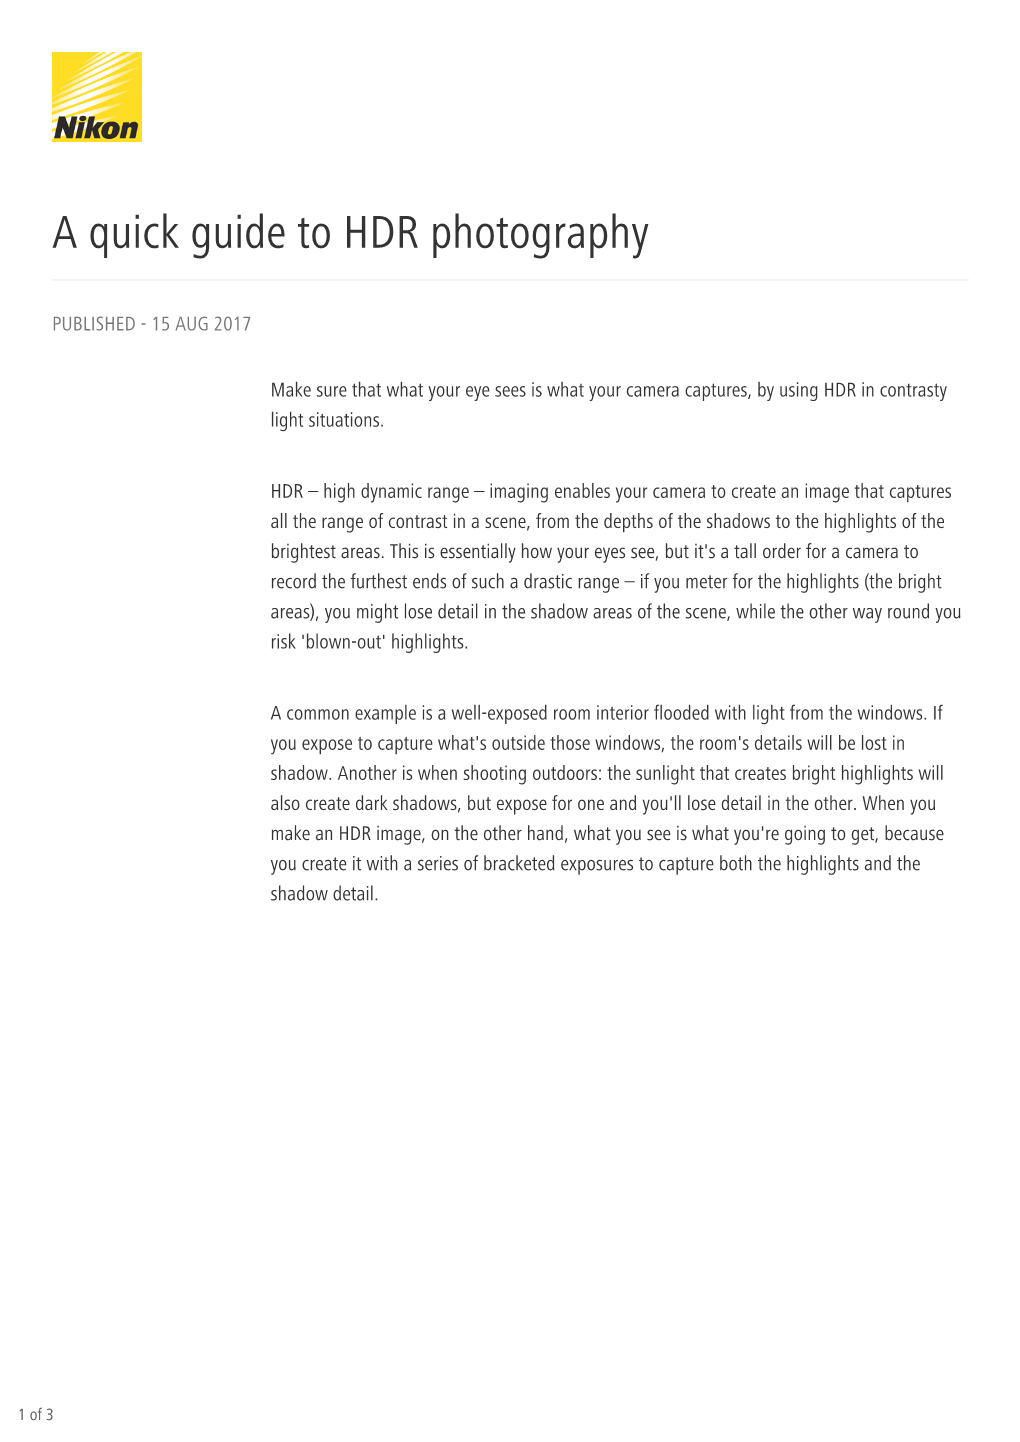 A Quick Guide to HDR Photography